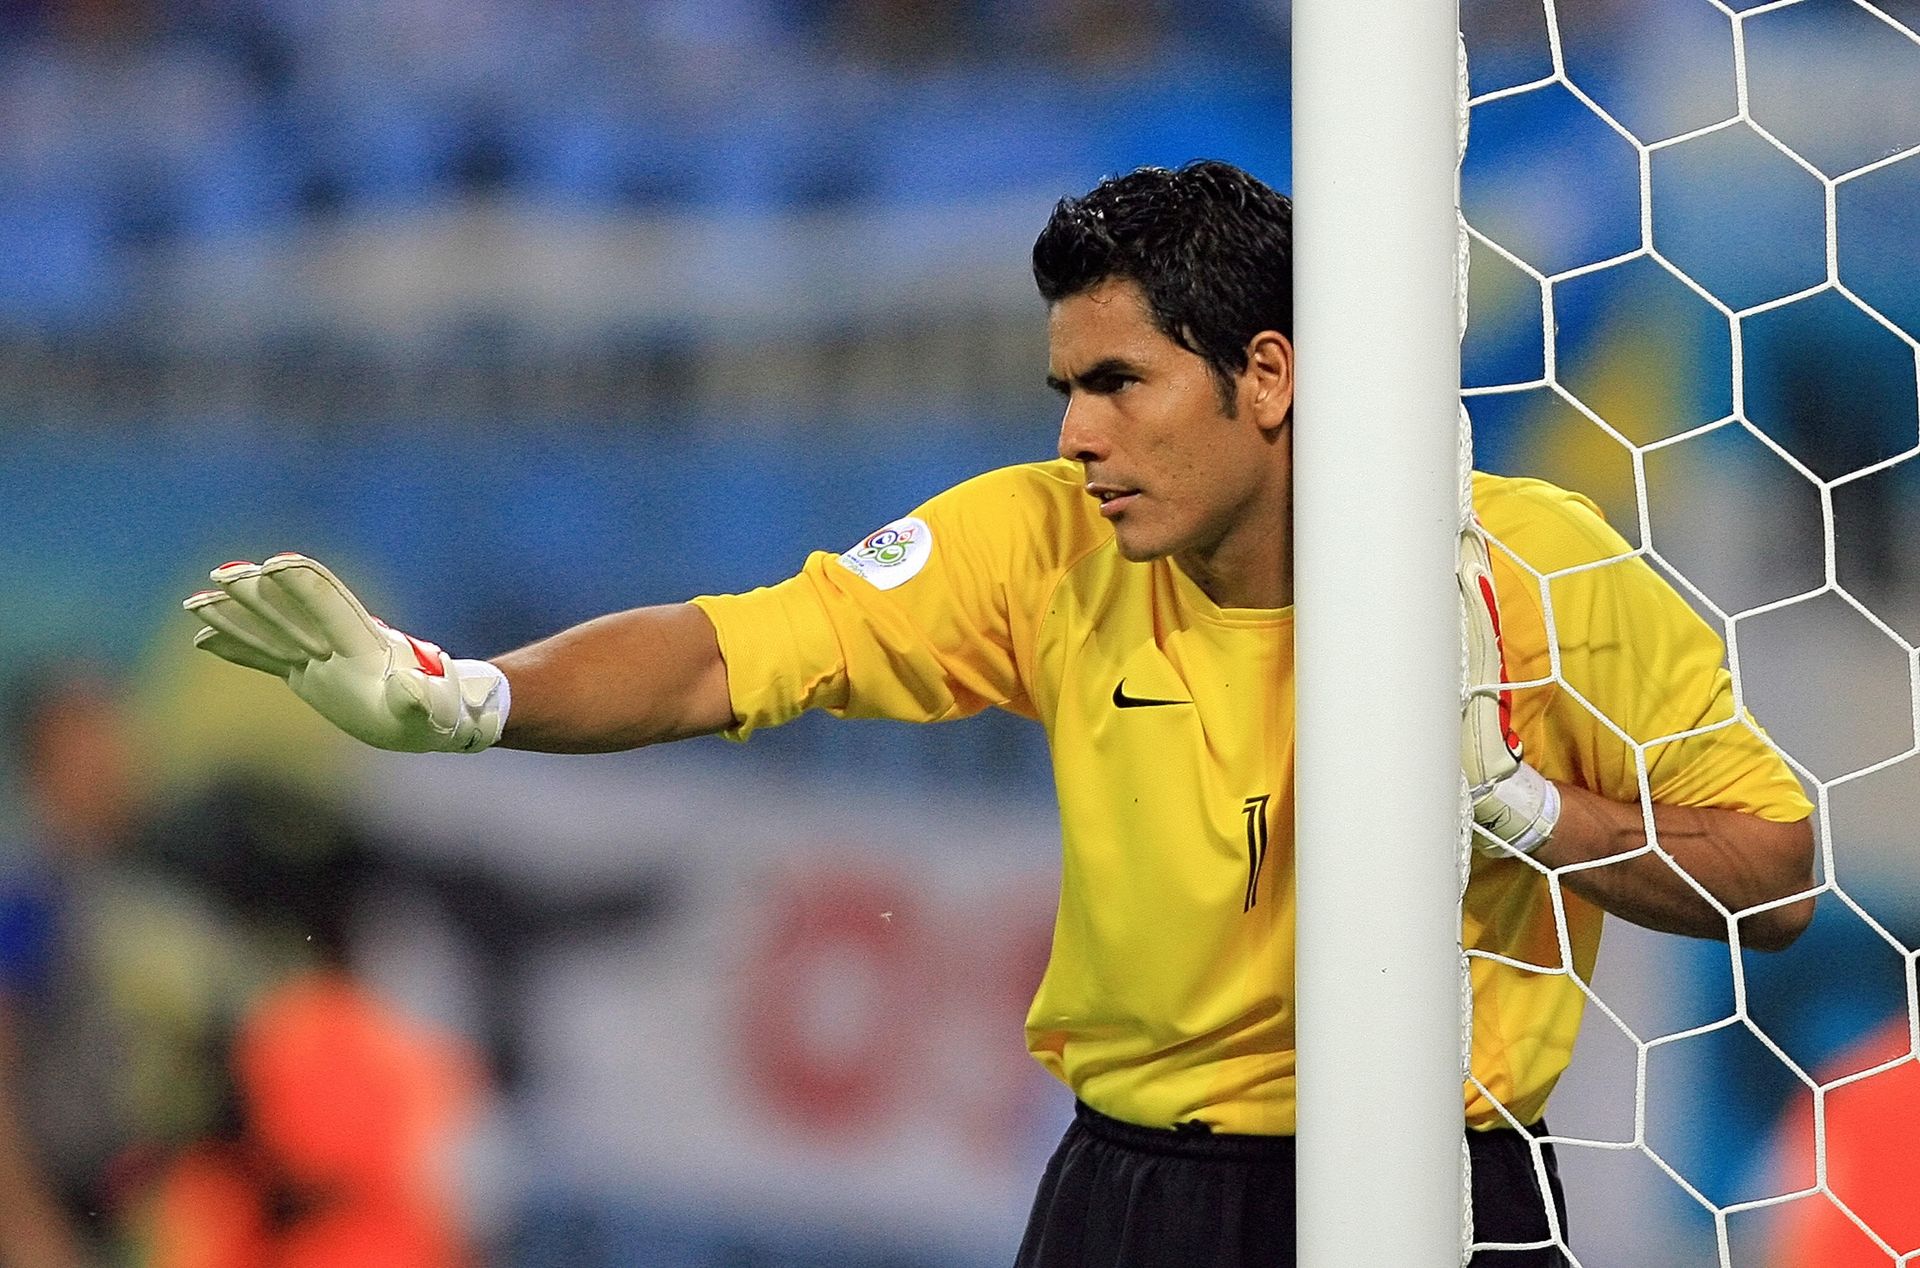 <p>                     Oswaldo Sanchez won 99 caps for Mexico between 1996 and 2011 and is considered one of the greatest goalkeepers in the nation's history.                   </p>                                      <p>                     Sanchez won the CONCACAF Gold Cup with Mexico in 2003, was Golden Glove at the Confederations Cup in 2005 and won club titles with Chivas and Santos Laguna. In the mid-2000s, he was one of the best in the world.                   </p>